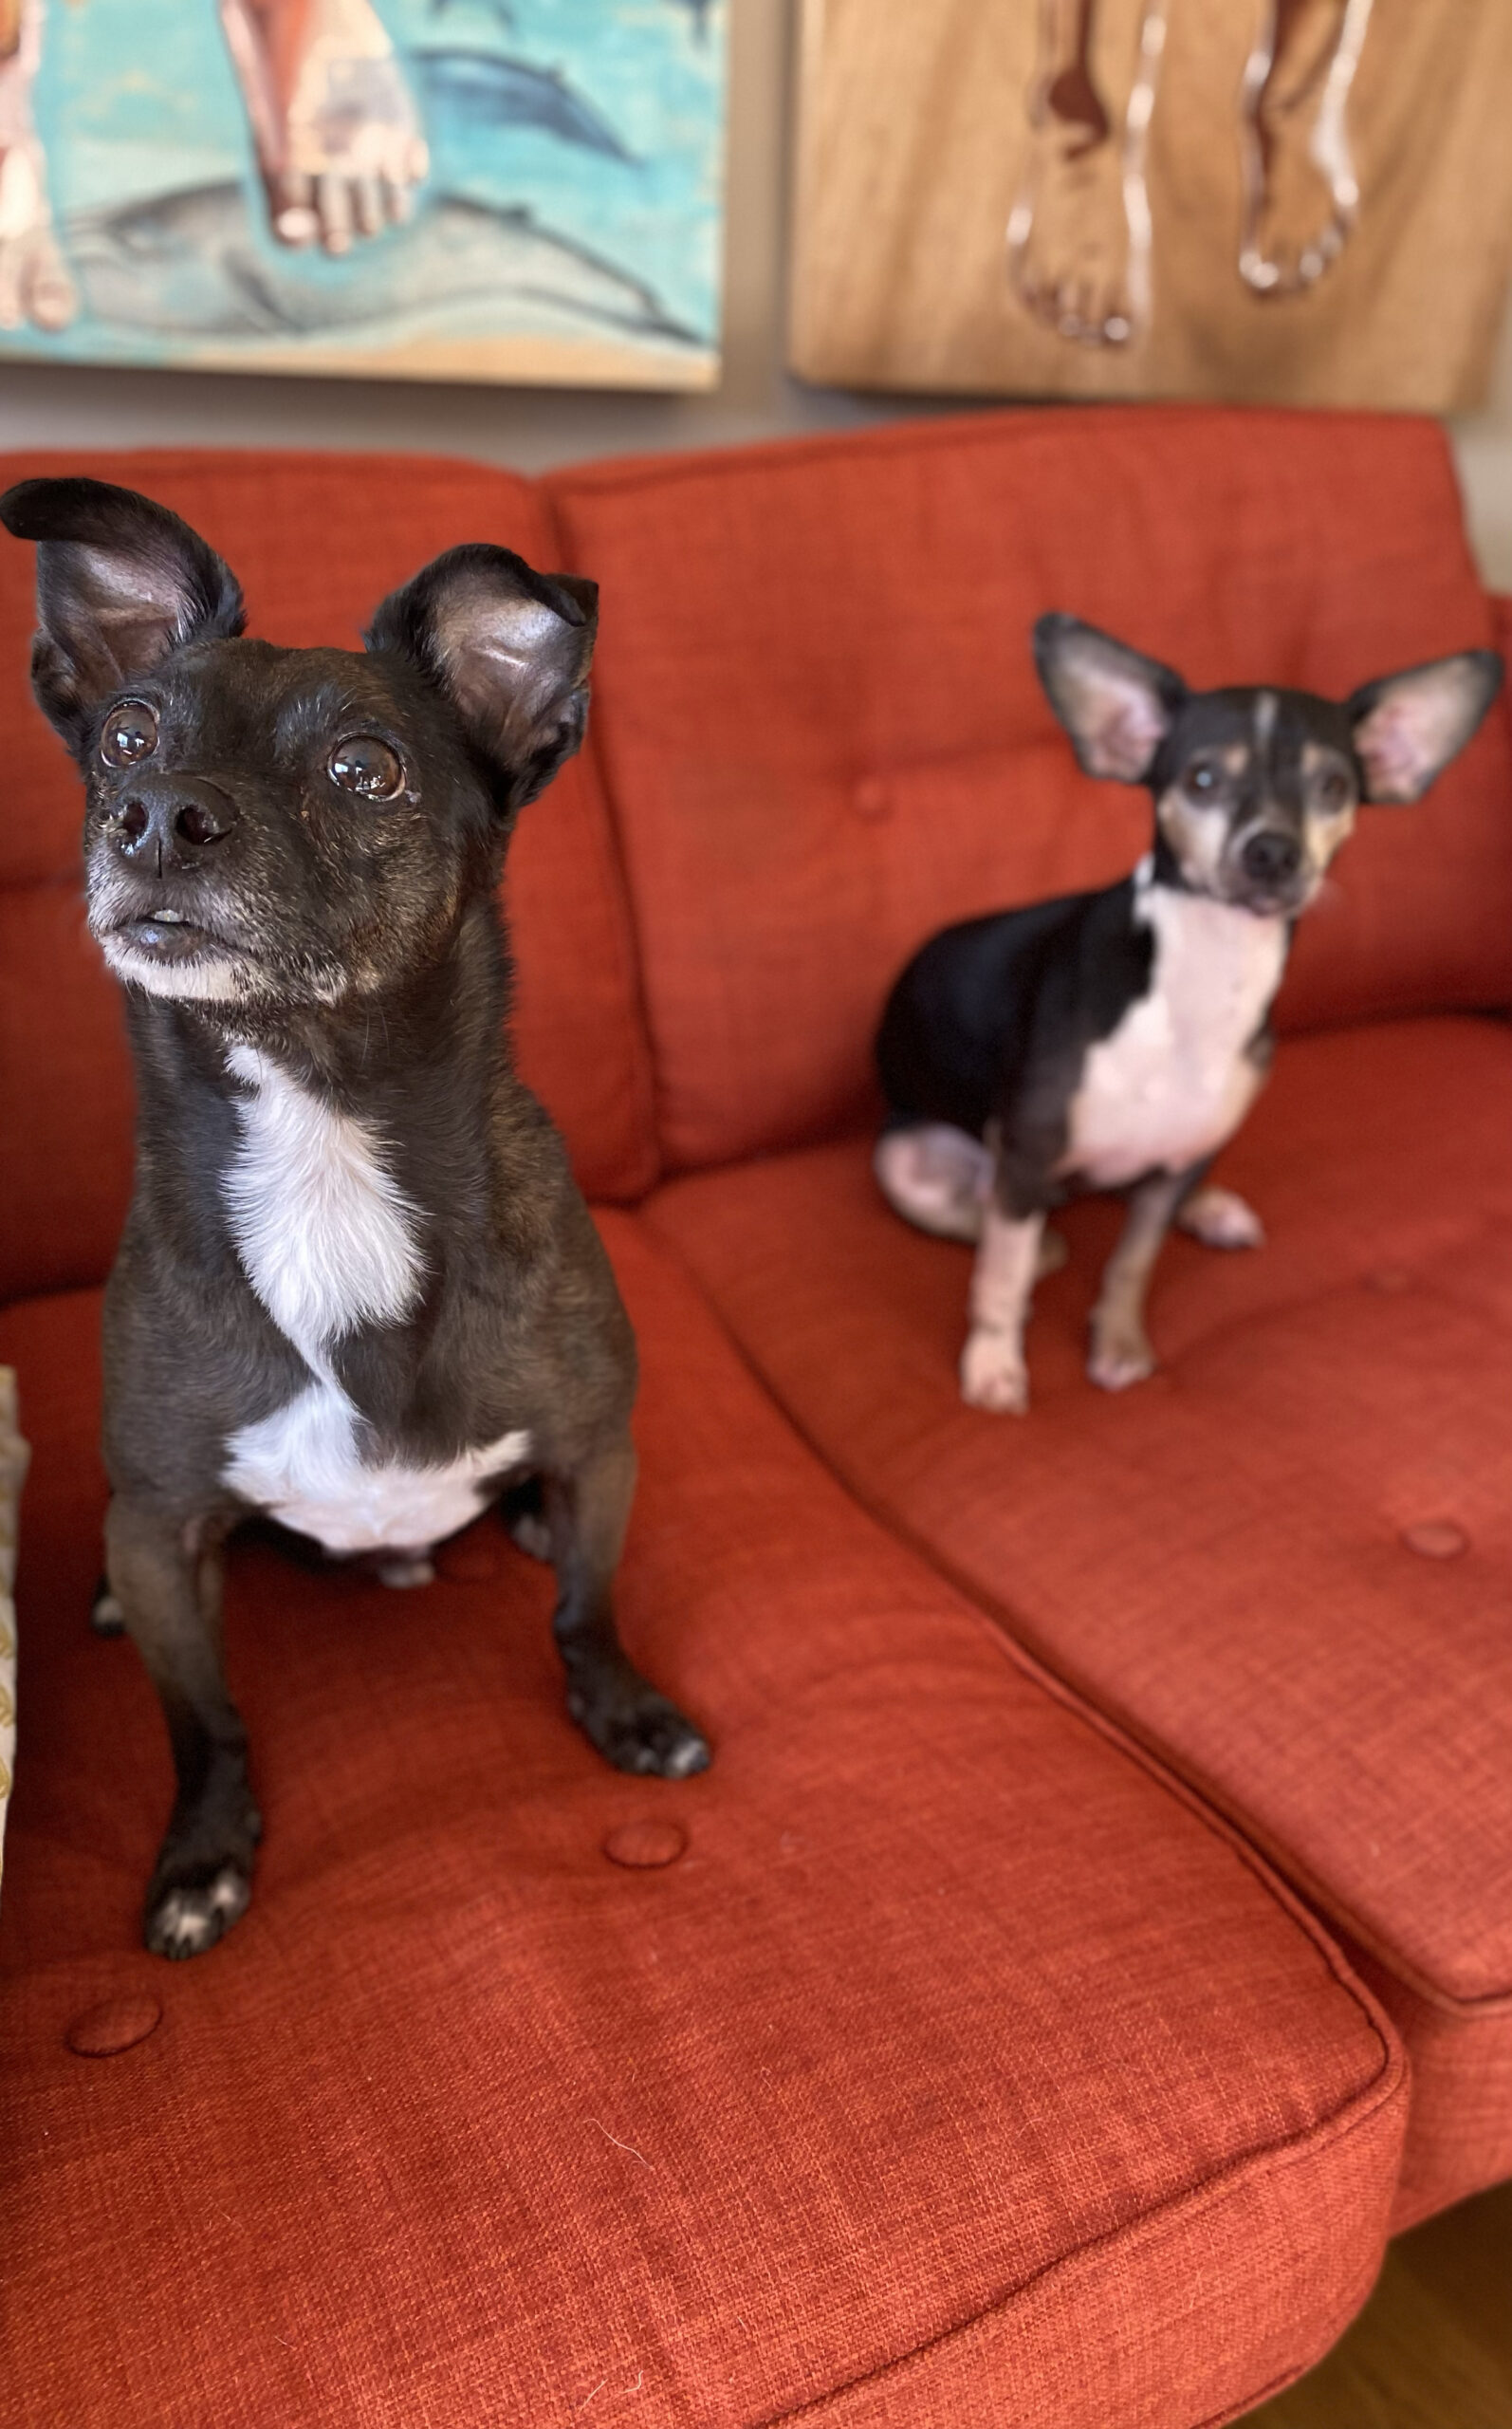 A picture of our dog Dewey sitting on a red sofa next to a dog we cared for in Oakland. Wally is a very good boy!